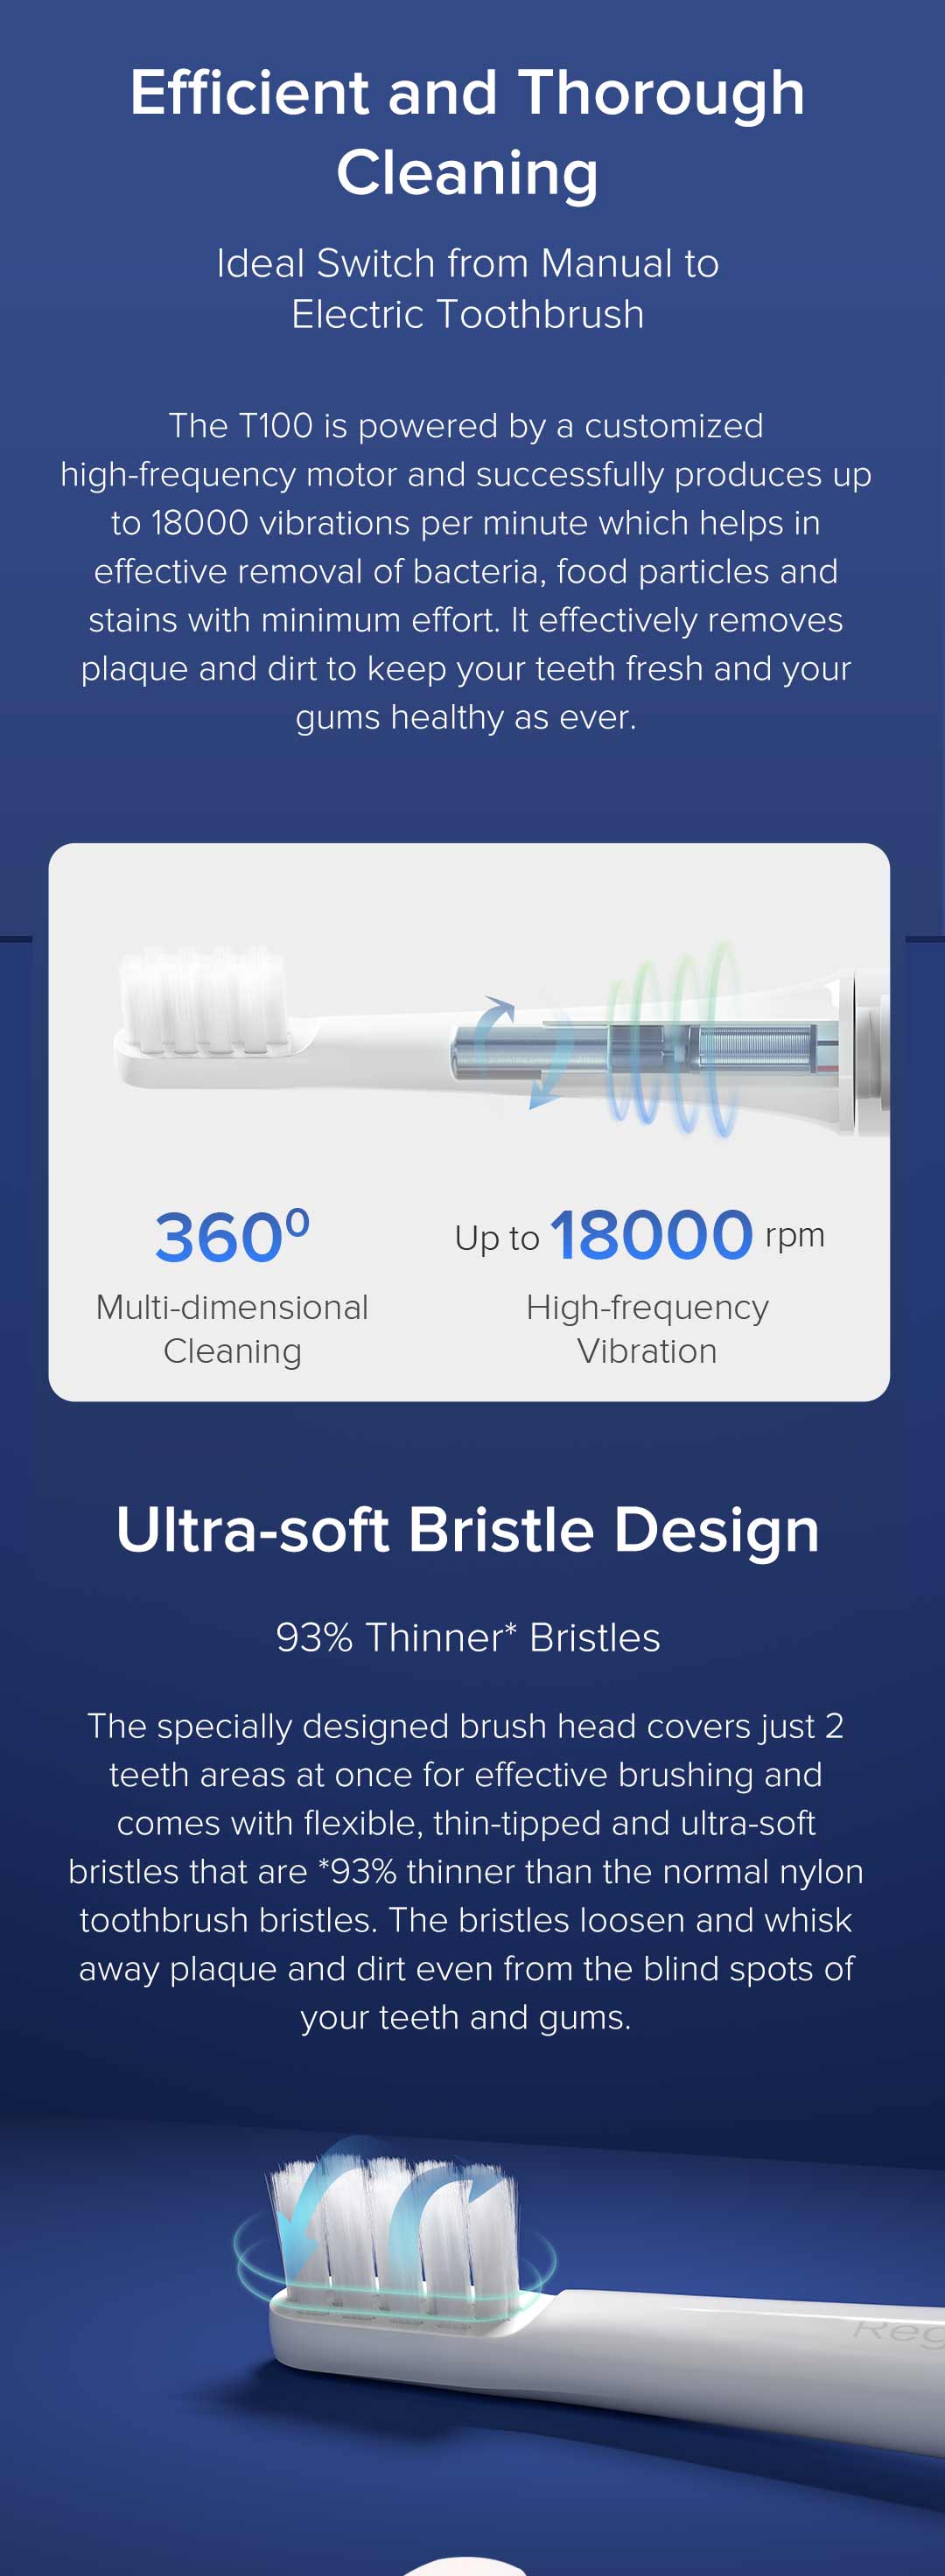 mi-electric-toothbrush-T100-efficient-cleaning